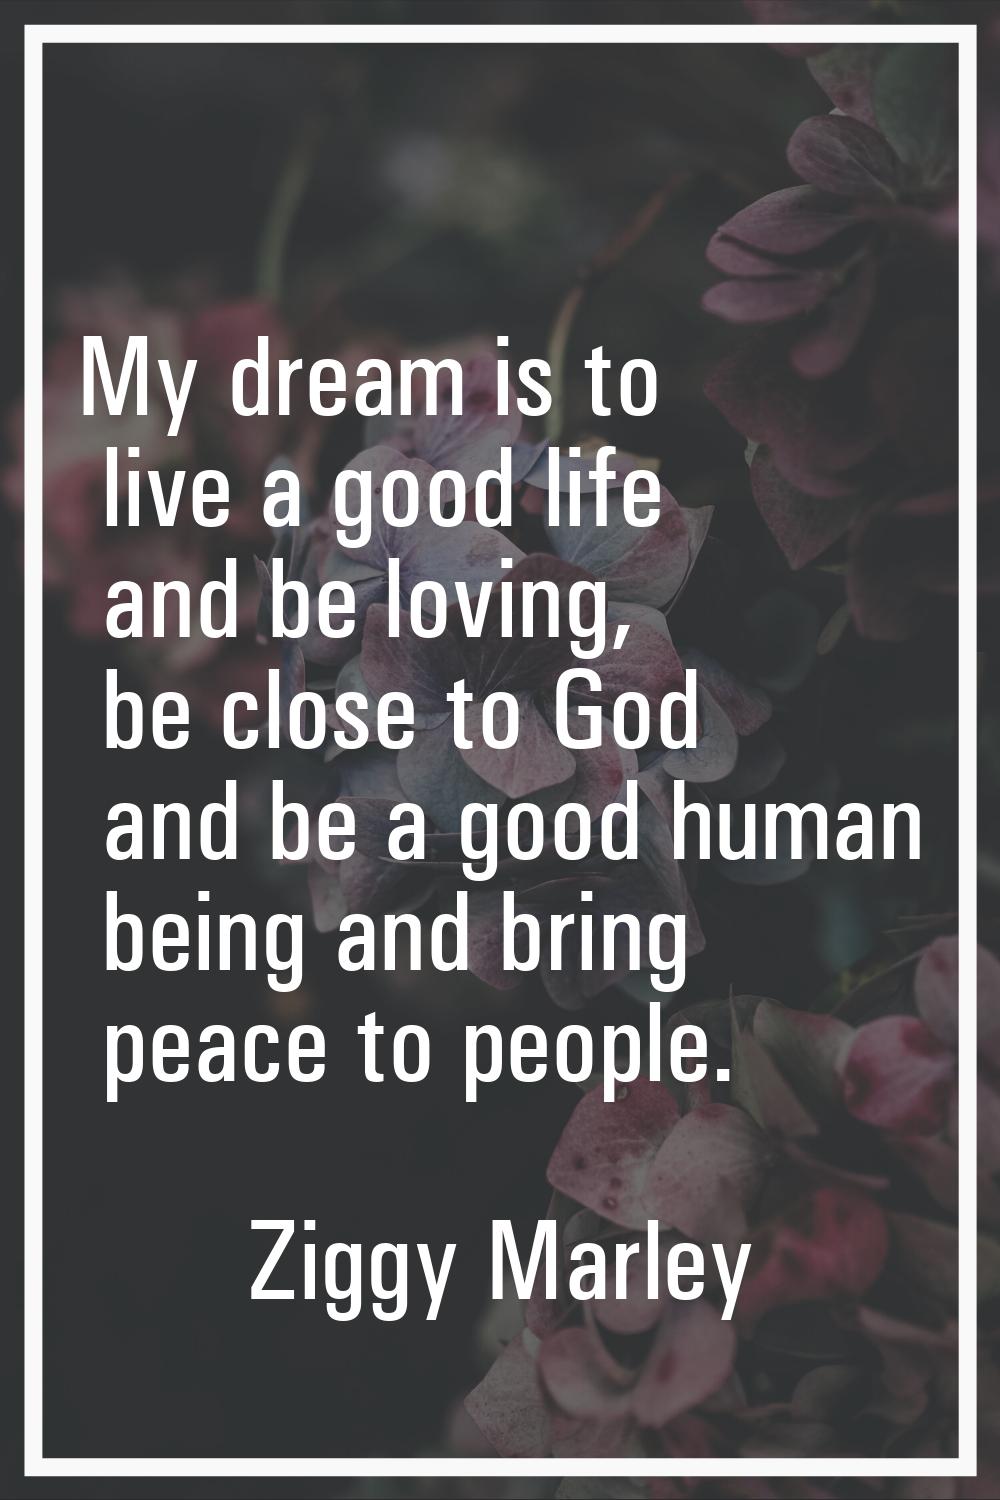 My dream is to live a good life and be loving, be close to God and be a good human being and bring 